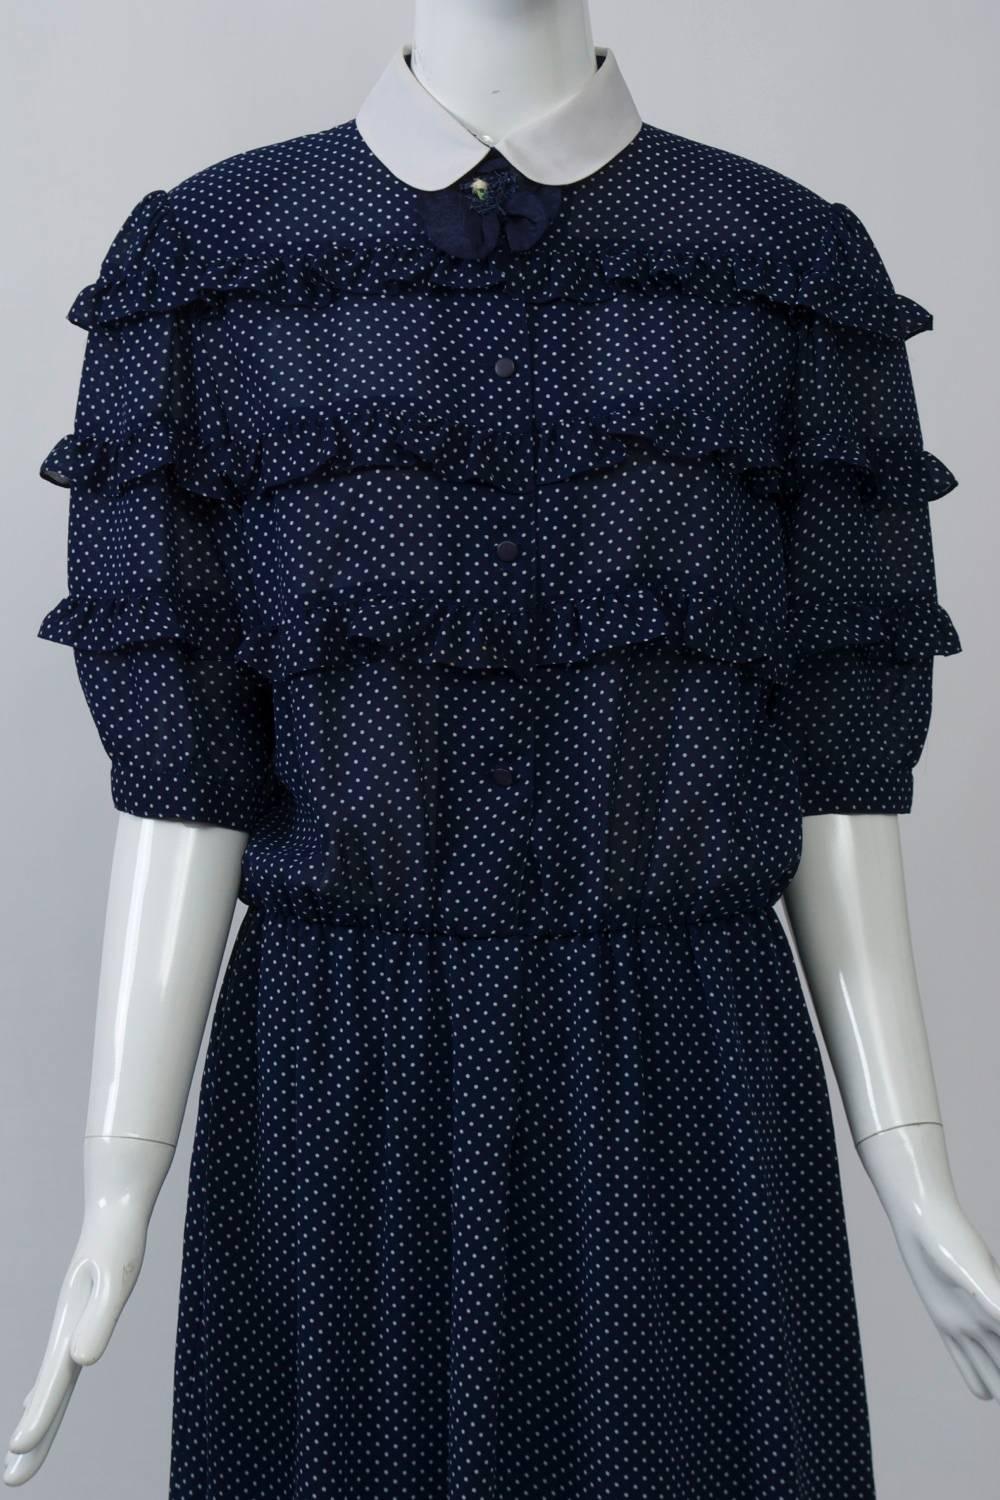 Hanae Mori modified shirtdress in a sheer and lightweight navy fabric with white micro dots features narrow rows of ruffles on the bodice and elbow-length sleeves, as well as a white peter pan collar. An elasticized waist creates a blouson style on